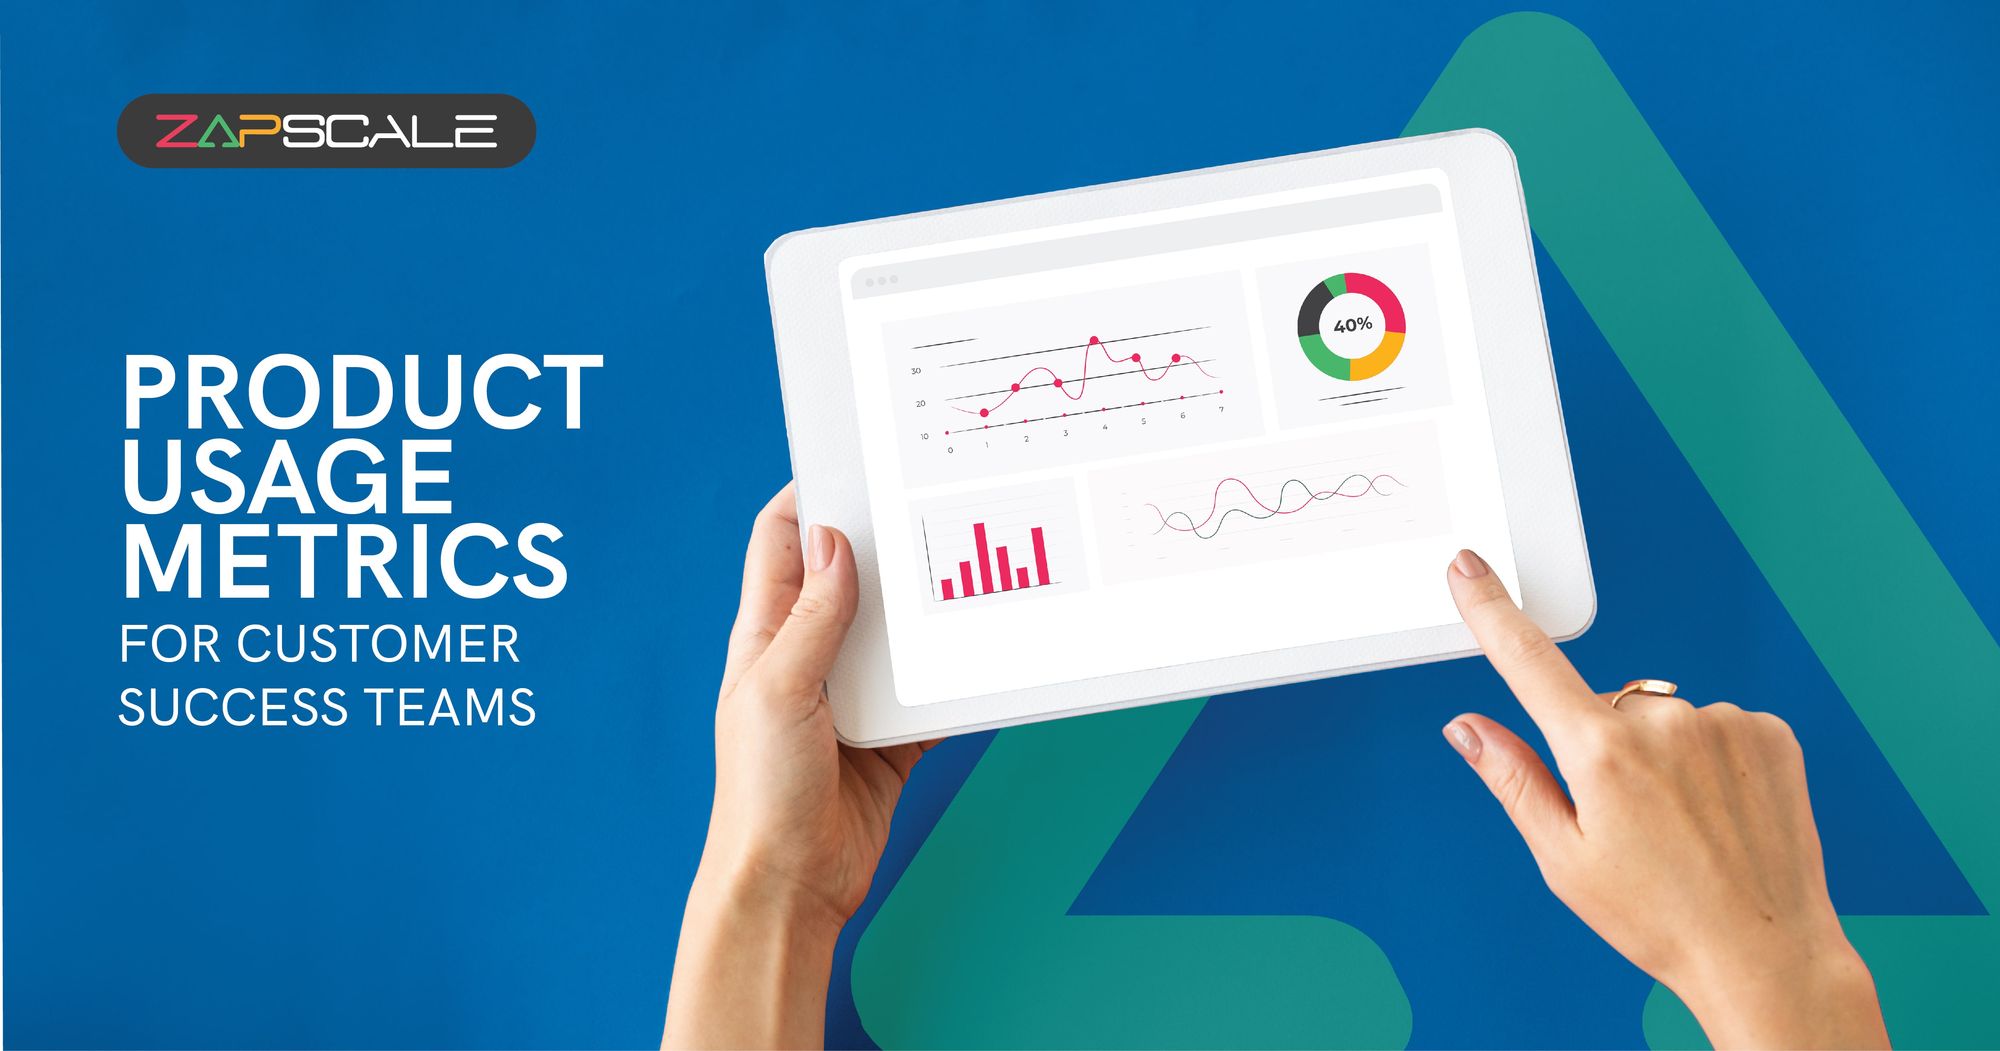 Top 5 Product Usage Metrics For Your Customer Success Team